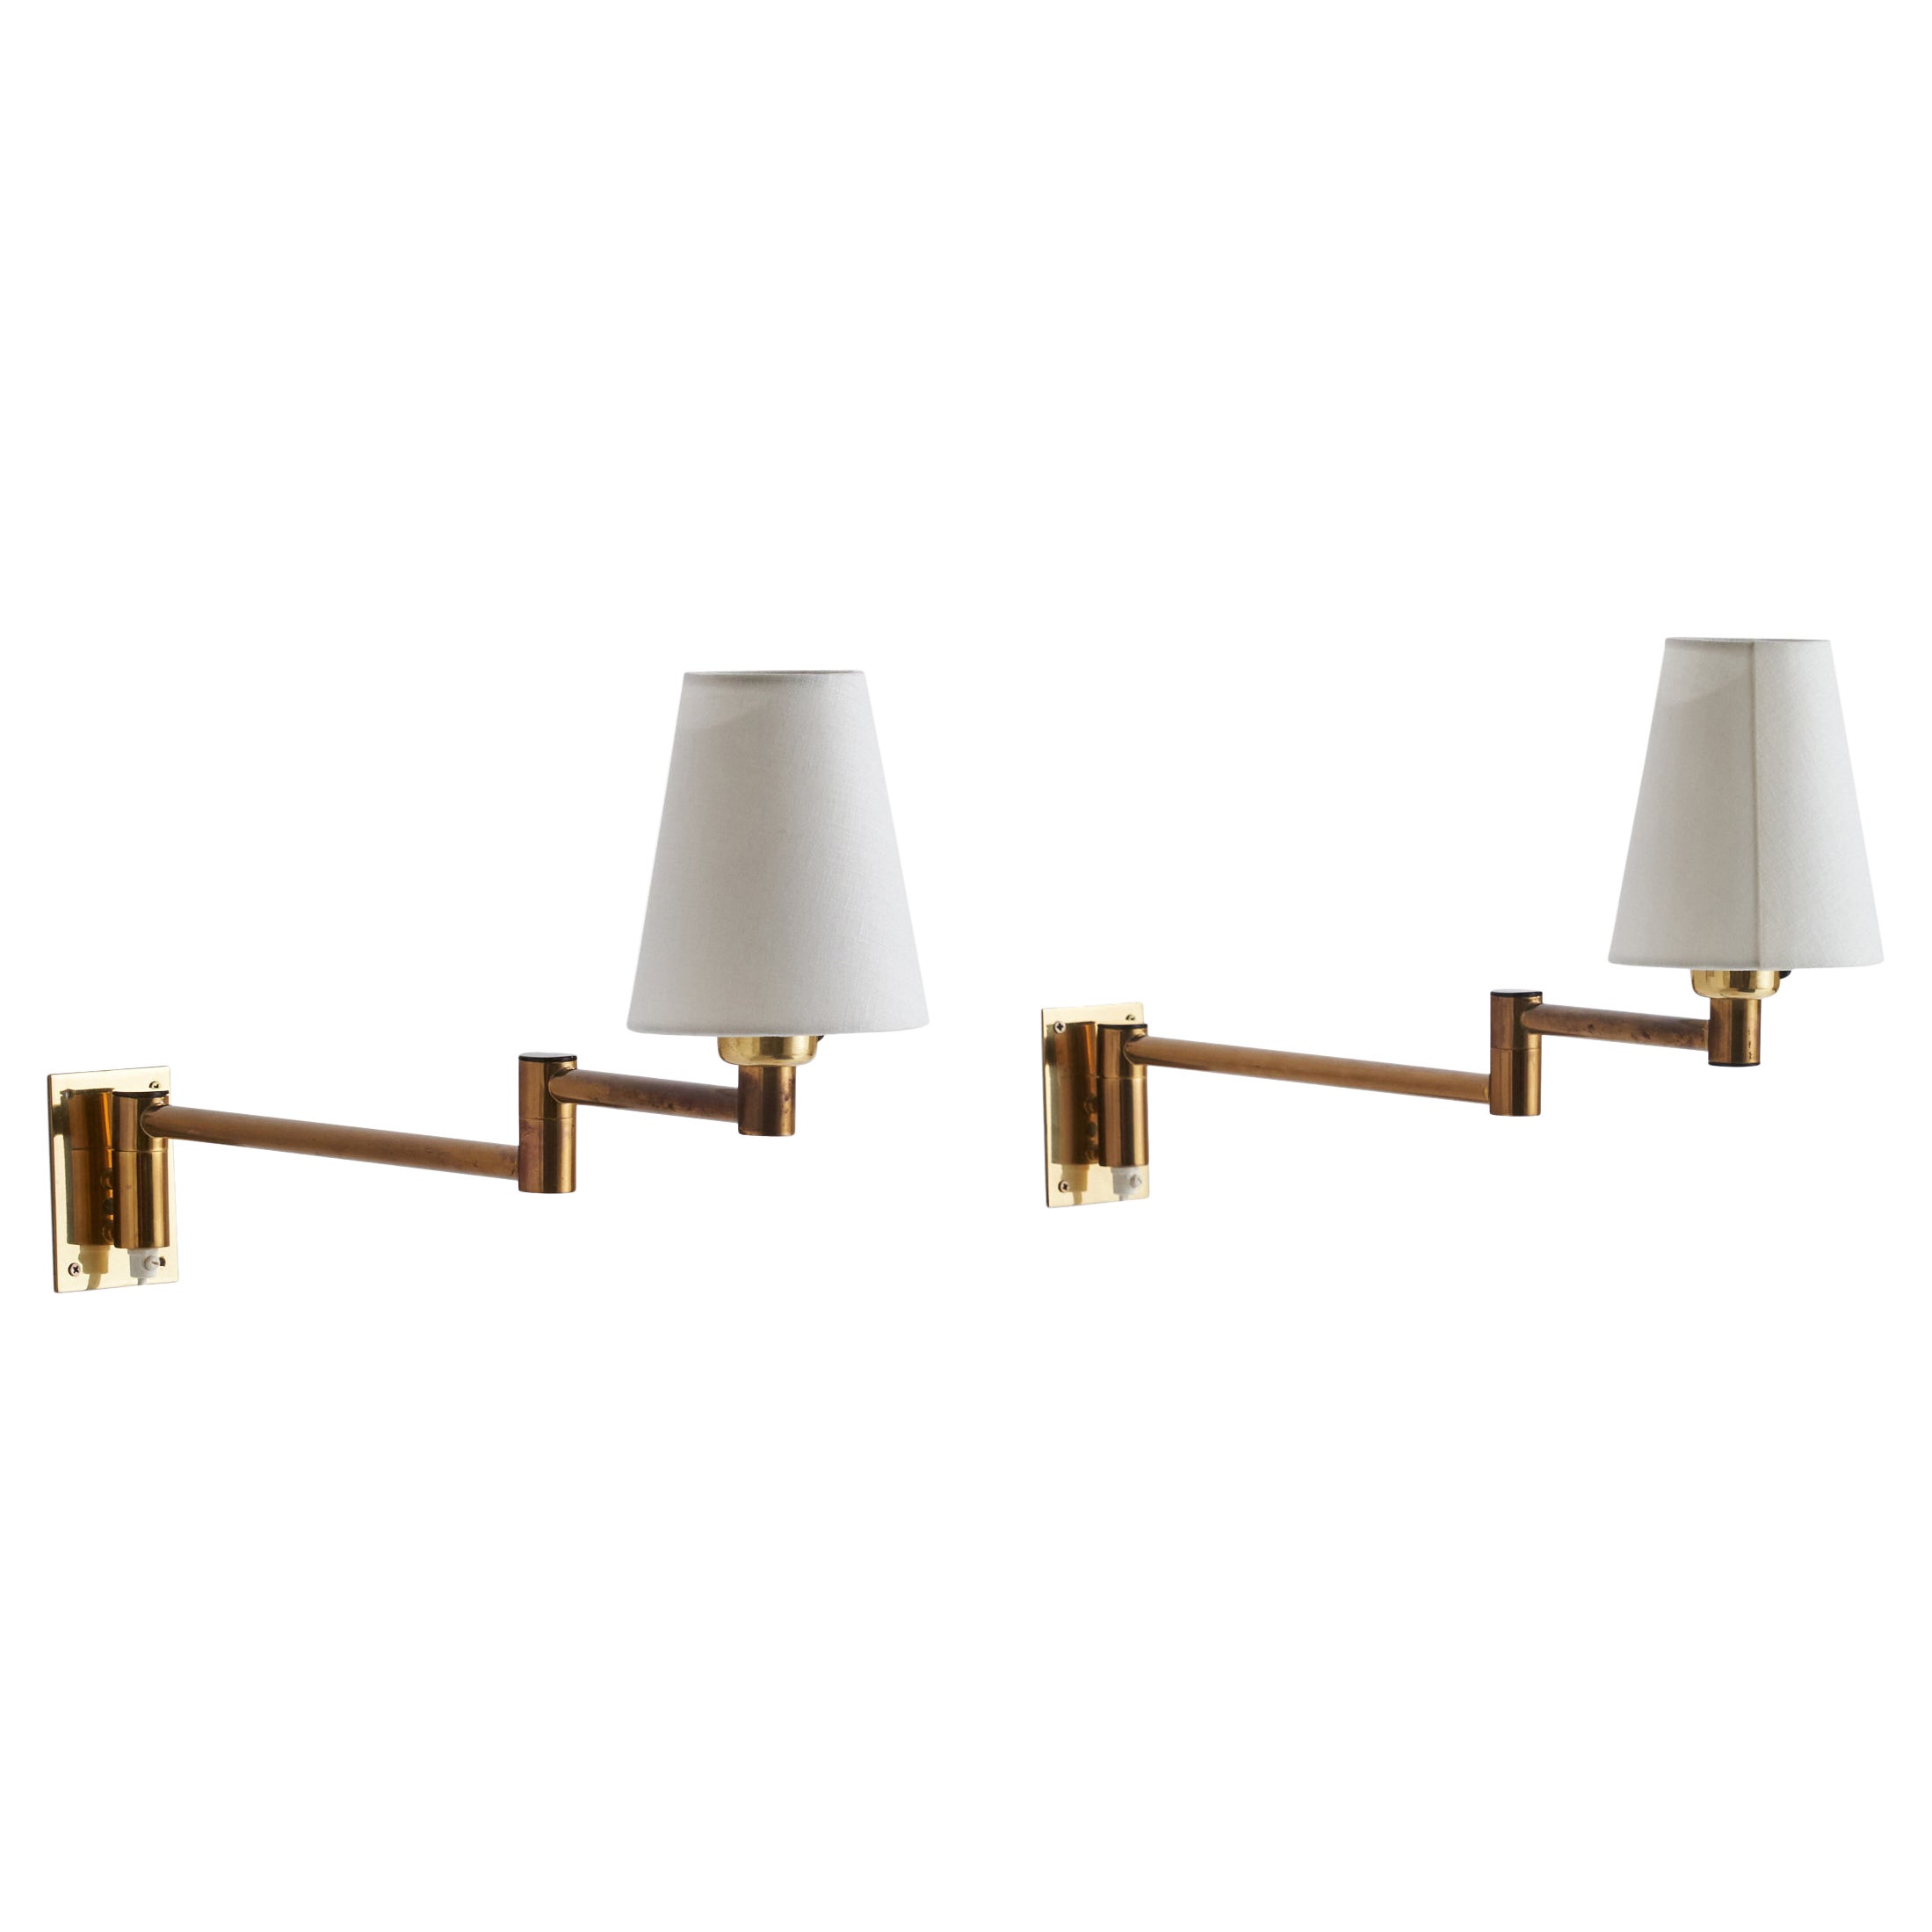 Fagerhults Belysning, Wall Lights, Brass, Sweden, 1980s For Sale